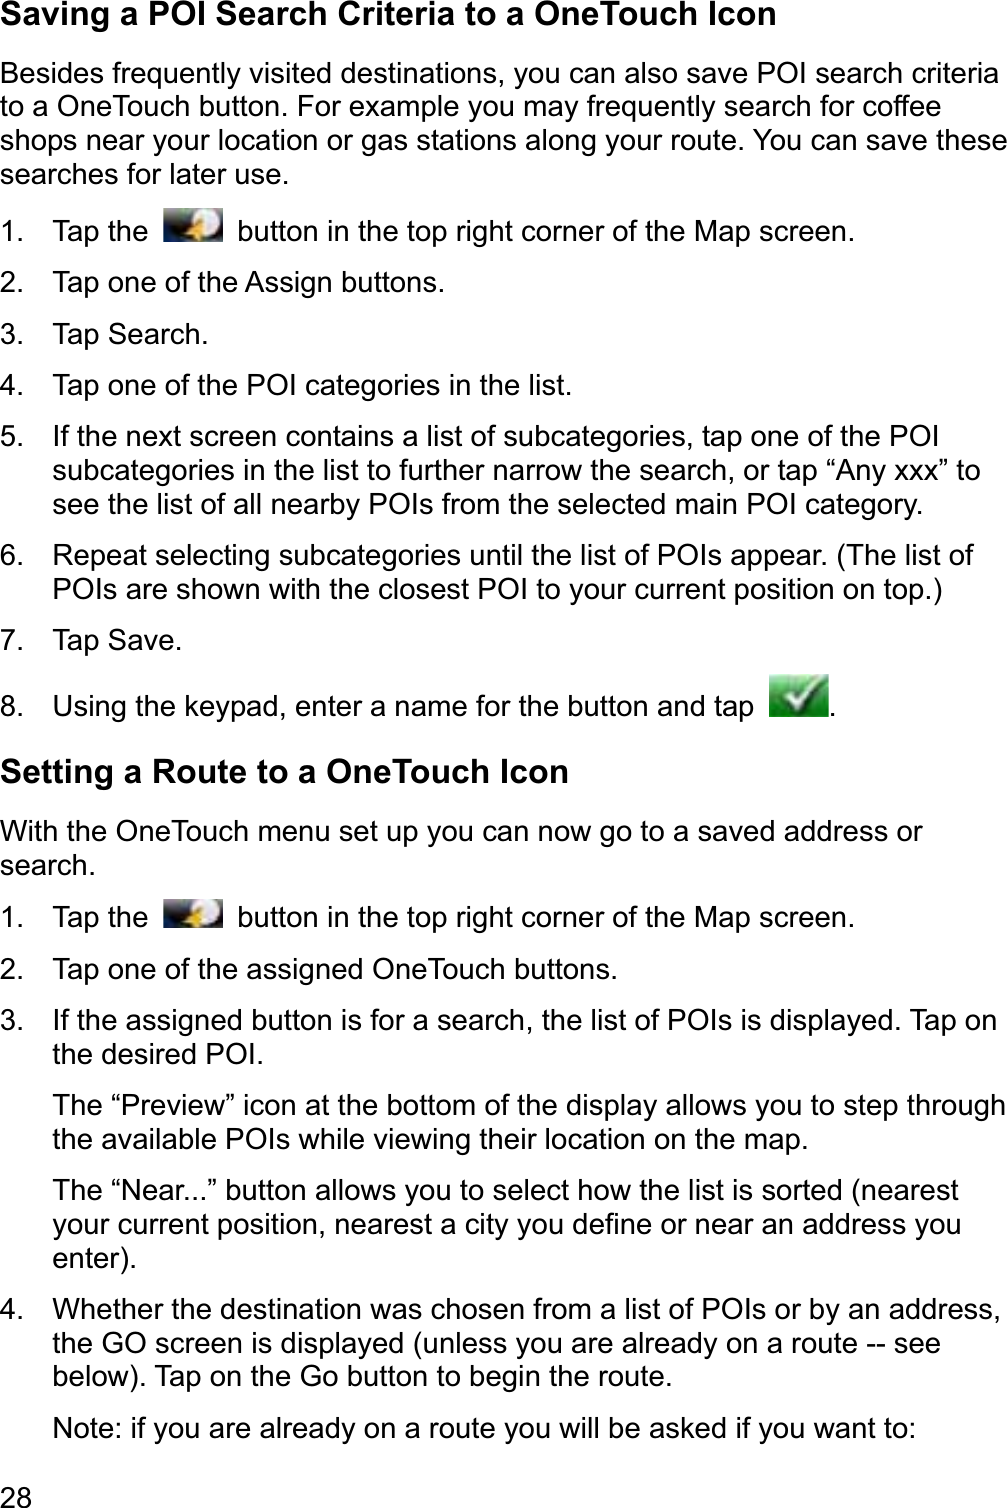 28Saving a POI Search Criteria to a OneTouch Icon Besides frequently visited destinations, you can also save POI search criteria to a OneTouch button. For example you may frequently search for coffee shops near your location or gas stations along your route. You can save these searches for later use. 1. Tap the    button in the top right corner of the Map screen. 2.  Tap one of the Assign buttons. 3. Tap Search. 4.  Tap one of the POI categories in the list. 5.  If the next screen contains a list of subcategories, tap one of the POI subcategories in the list to further narrow the search, or tap “Any xxx” to see the list of all nearby POIs from the selected main POI category. 6.  Repeat selecting subcategories until the list of POIs appear. (The list of POIs are shown with the closest POI to your current position on top.) 7. Tap Save. 8.  Using the keypad, enter a name for the button and tap  .Setting a Route to a OneTouch Icon With the OneTouch menu set up you can now go to a saved address or search. 1. Tap the    button in the top right corner of the Map screen. 2.  Tap one of the assigned OneTouch buttons. 3.  If the assigned button is for a search, the list of POIs is displayed. Tap on the desired POI. The “Preview” icon at the bottom of the display allows you to step through the available POIs while viewing their location on the map. The “Near...” button allows you to select how the list is sorted (nearest your current position, nearest a city you define or near an address you enter).4.  Whether the destination was chosen from a list of POIs or by an address, the GO screen is displayed (unless you are already on a route -- see below). Tap on the Go button to begin the route. Note: if you are already on a route you will be asked if you want to: 